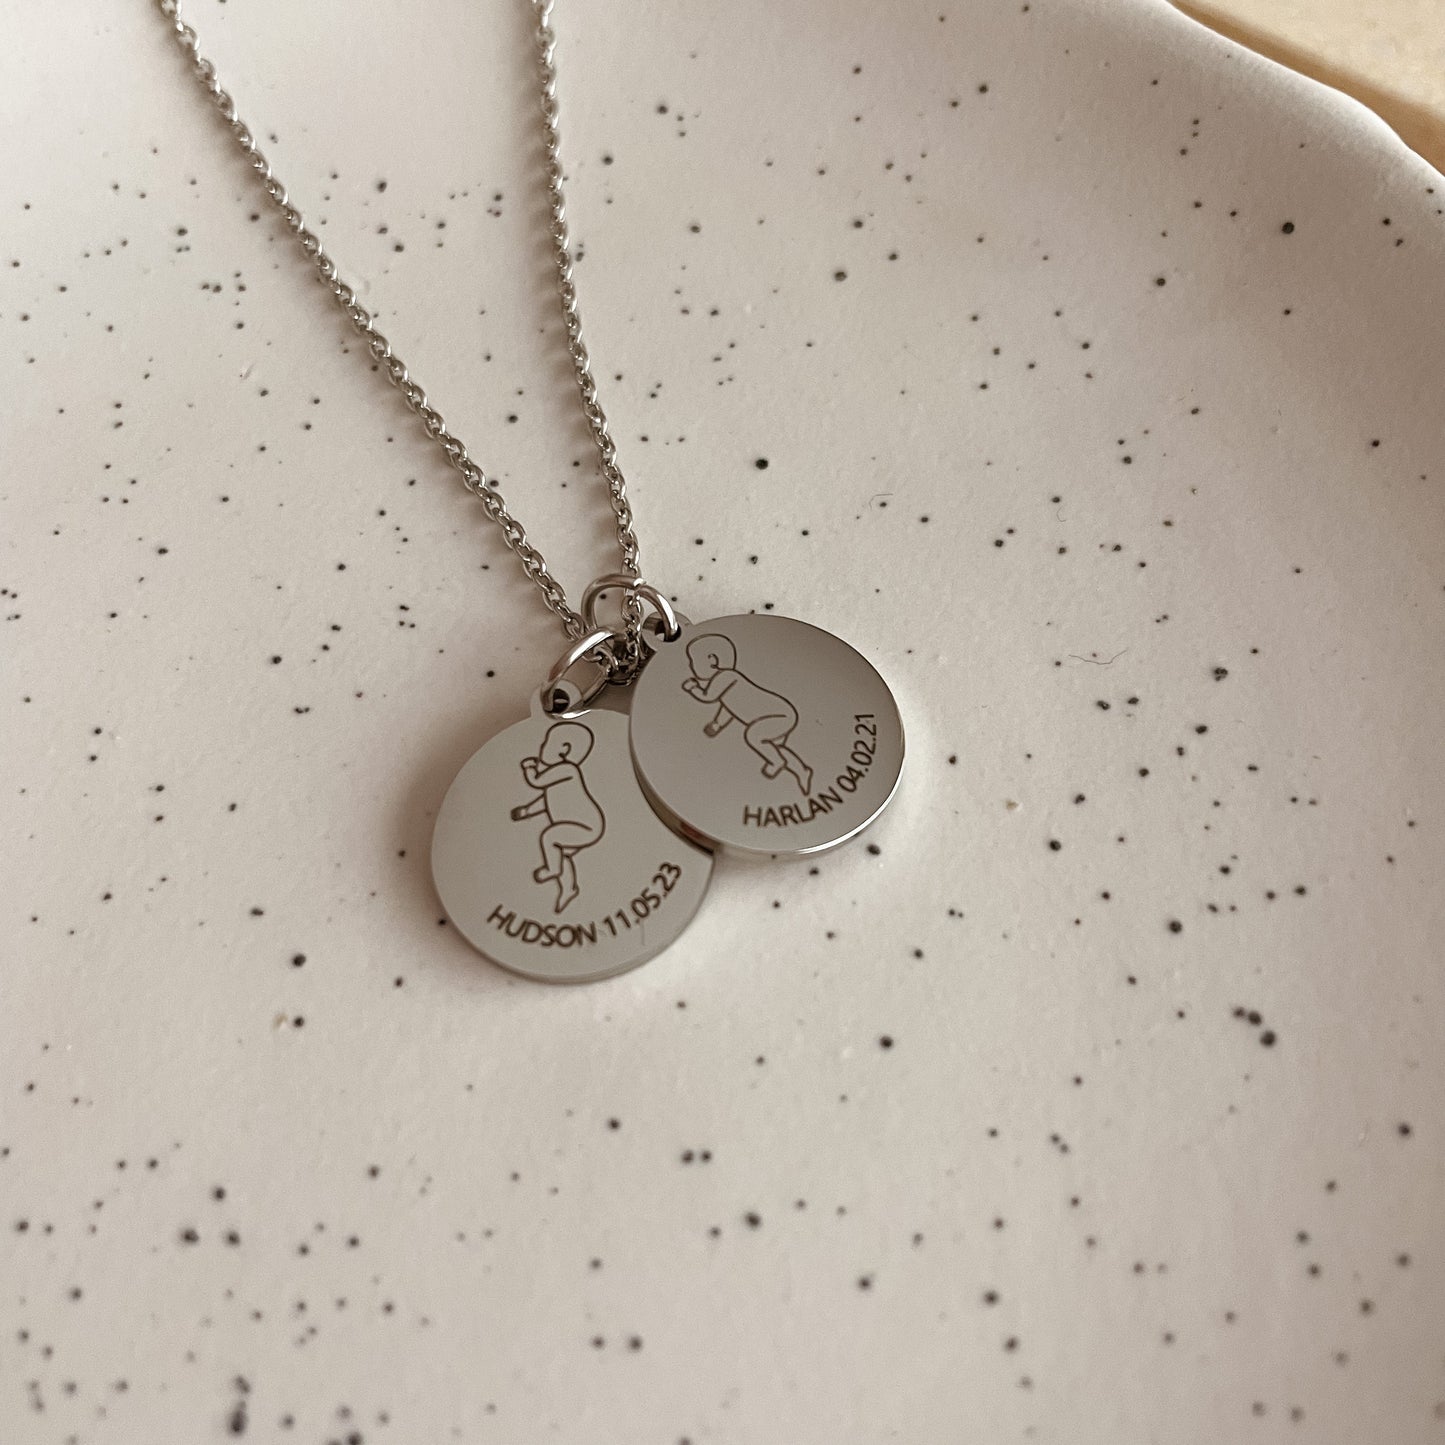 Baby illustration necklace